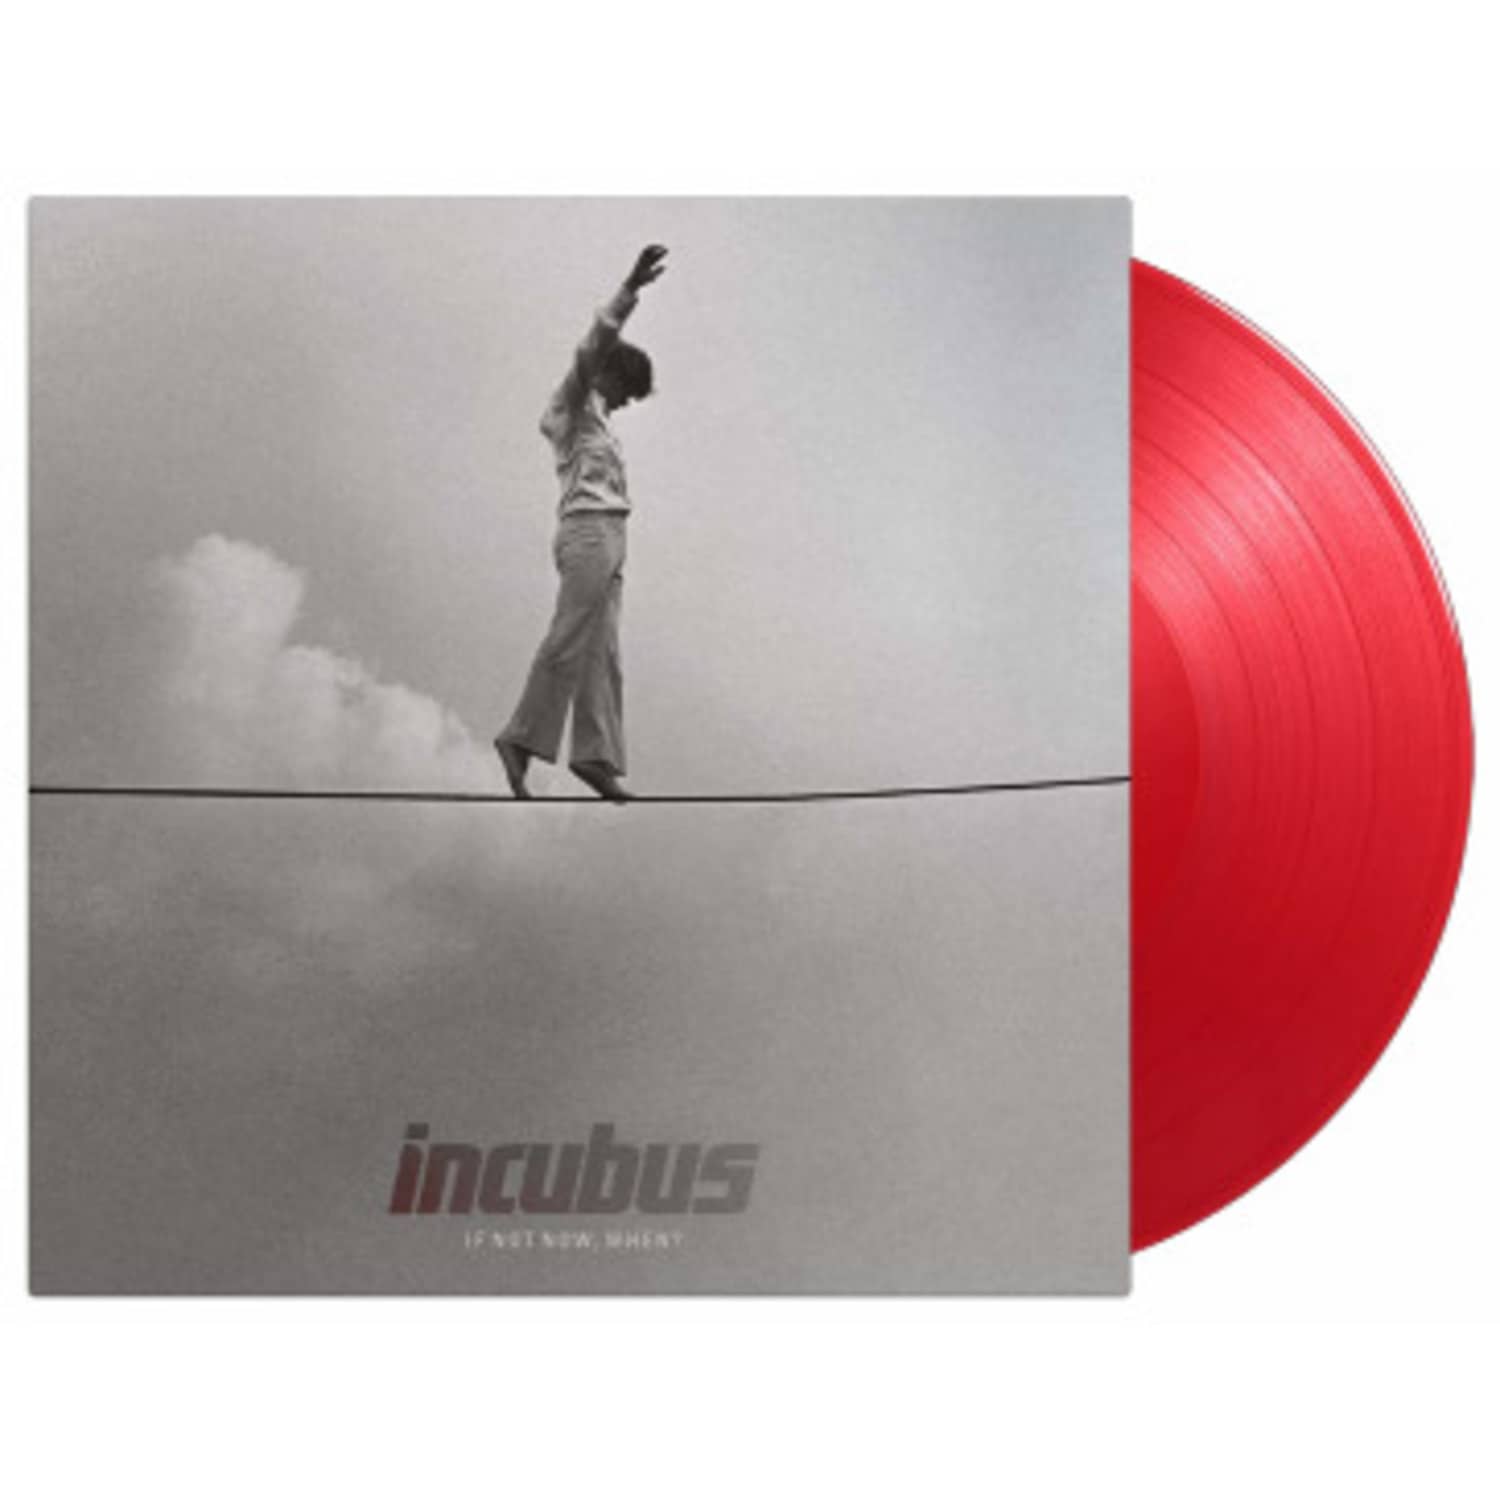 Incubus - IF NOT NOW, WHEN? 